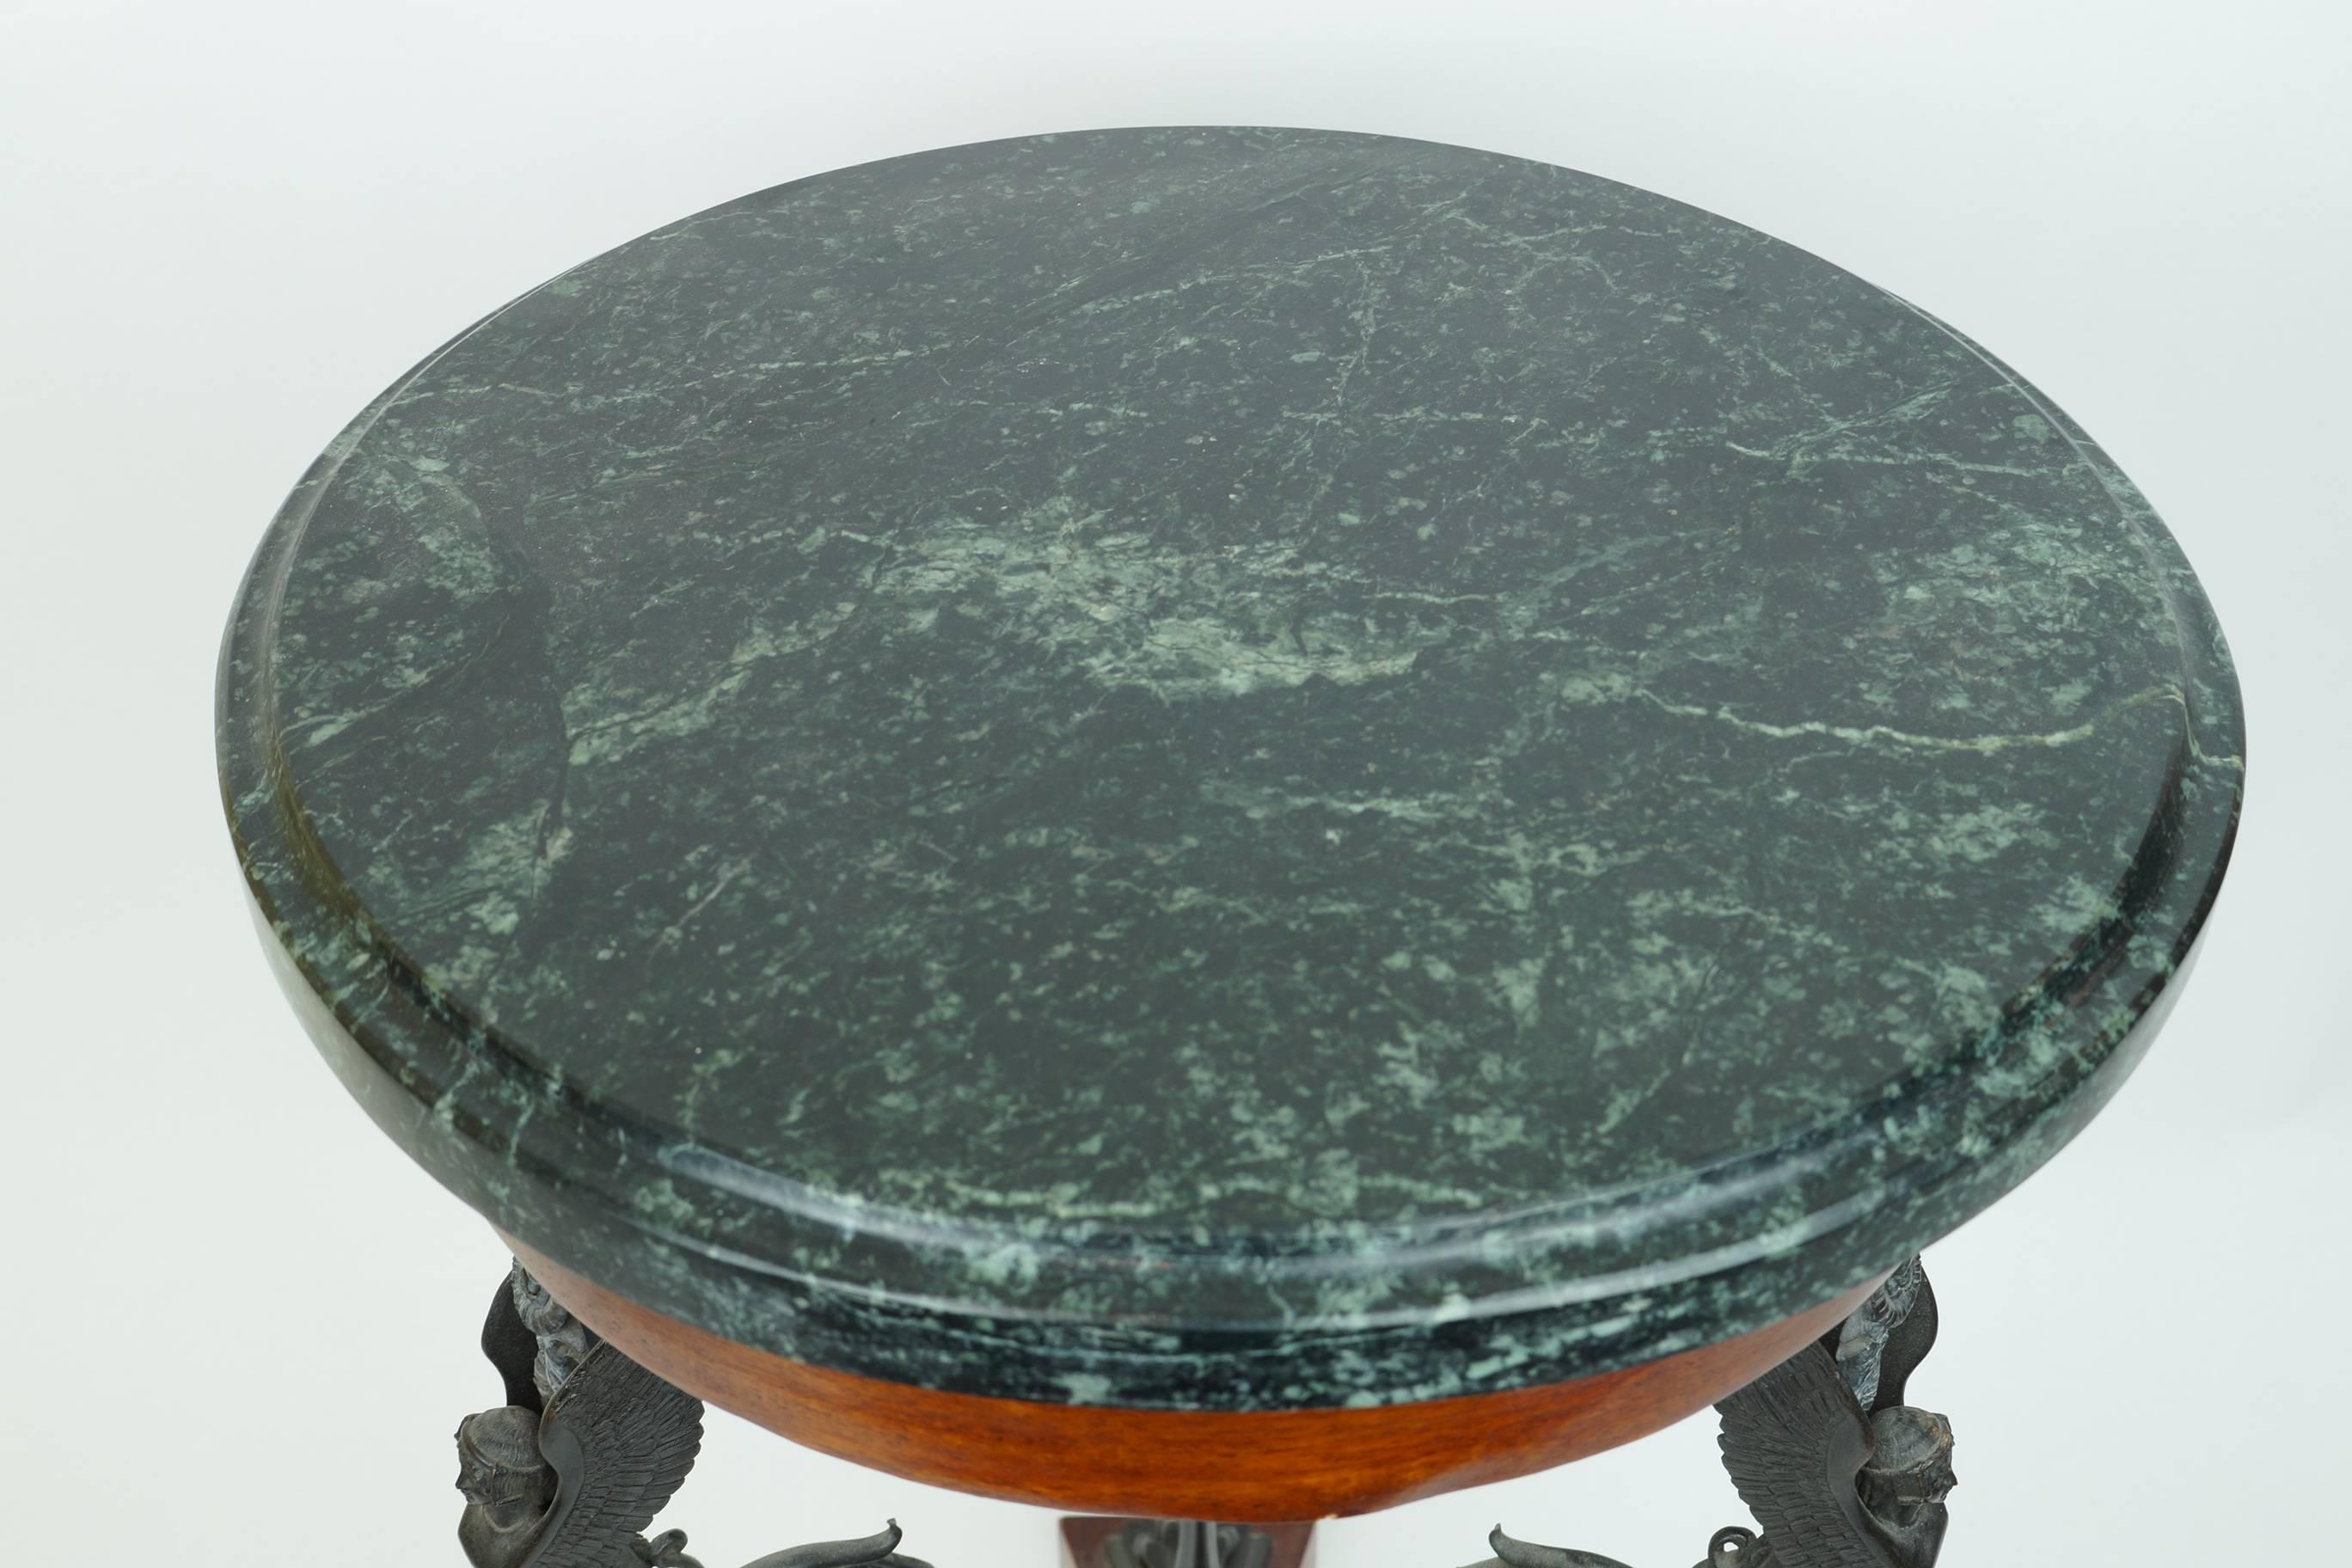 Neoclassical patinated bronze figural pedestal side table with winged figures and round marble top.
Stock Number: F61